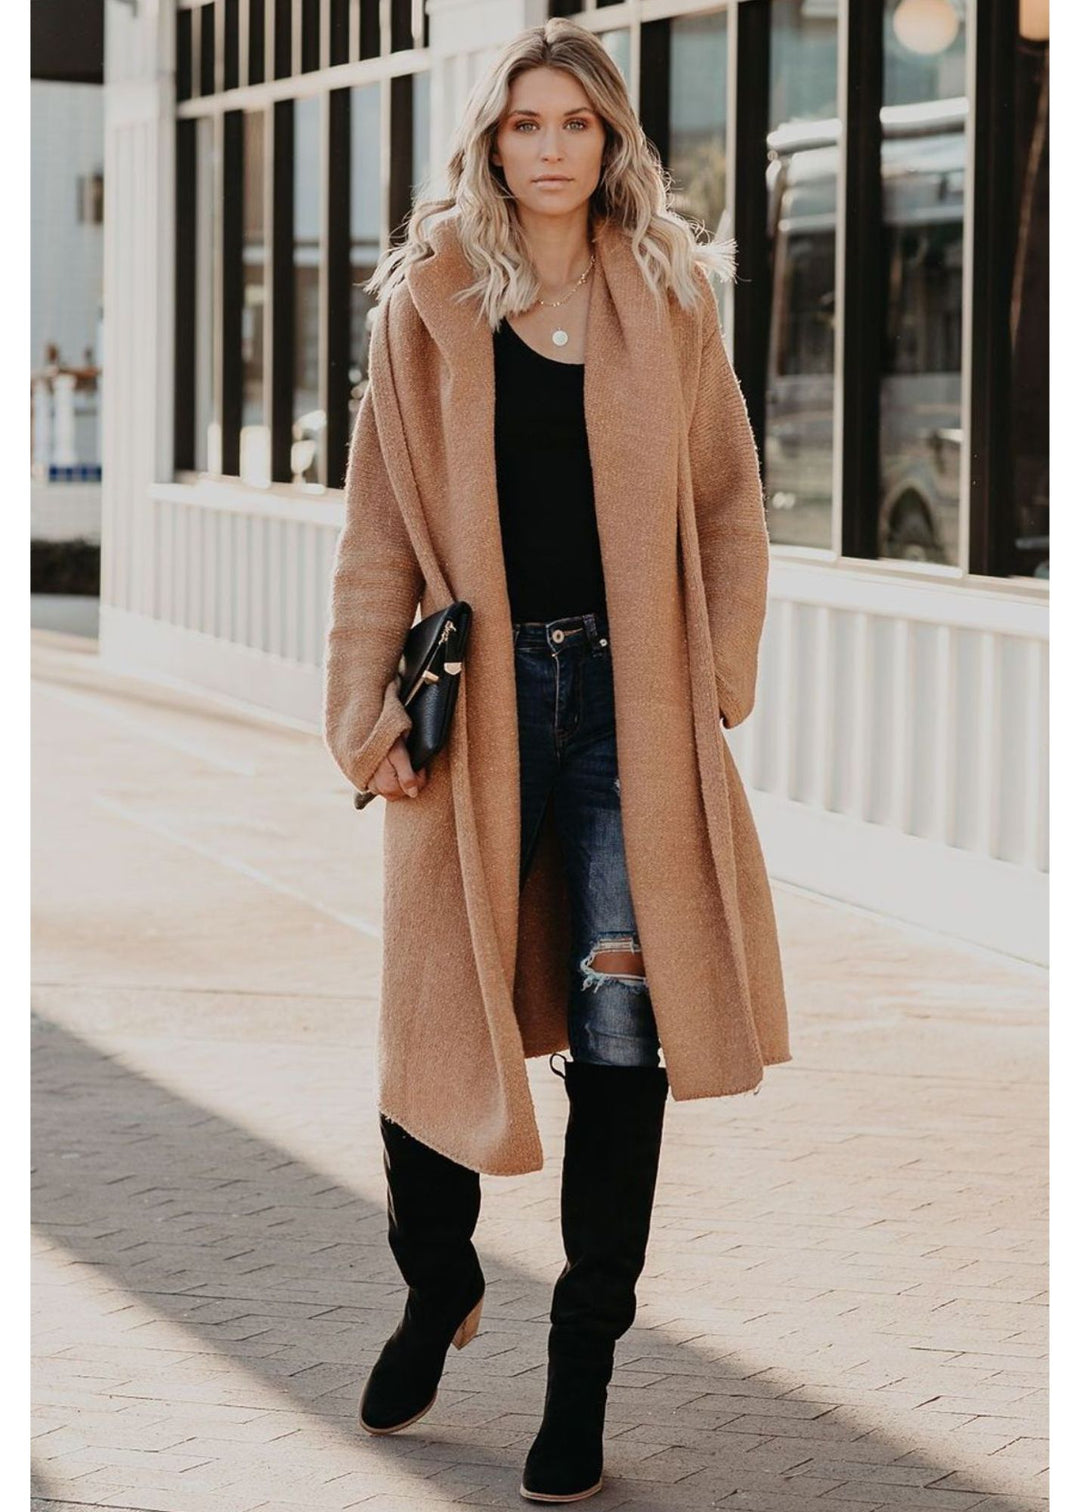 Sweater Coat in Camel by Vibe Apparel